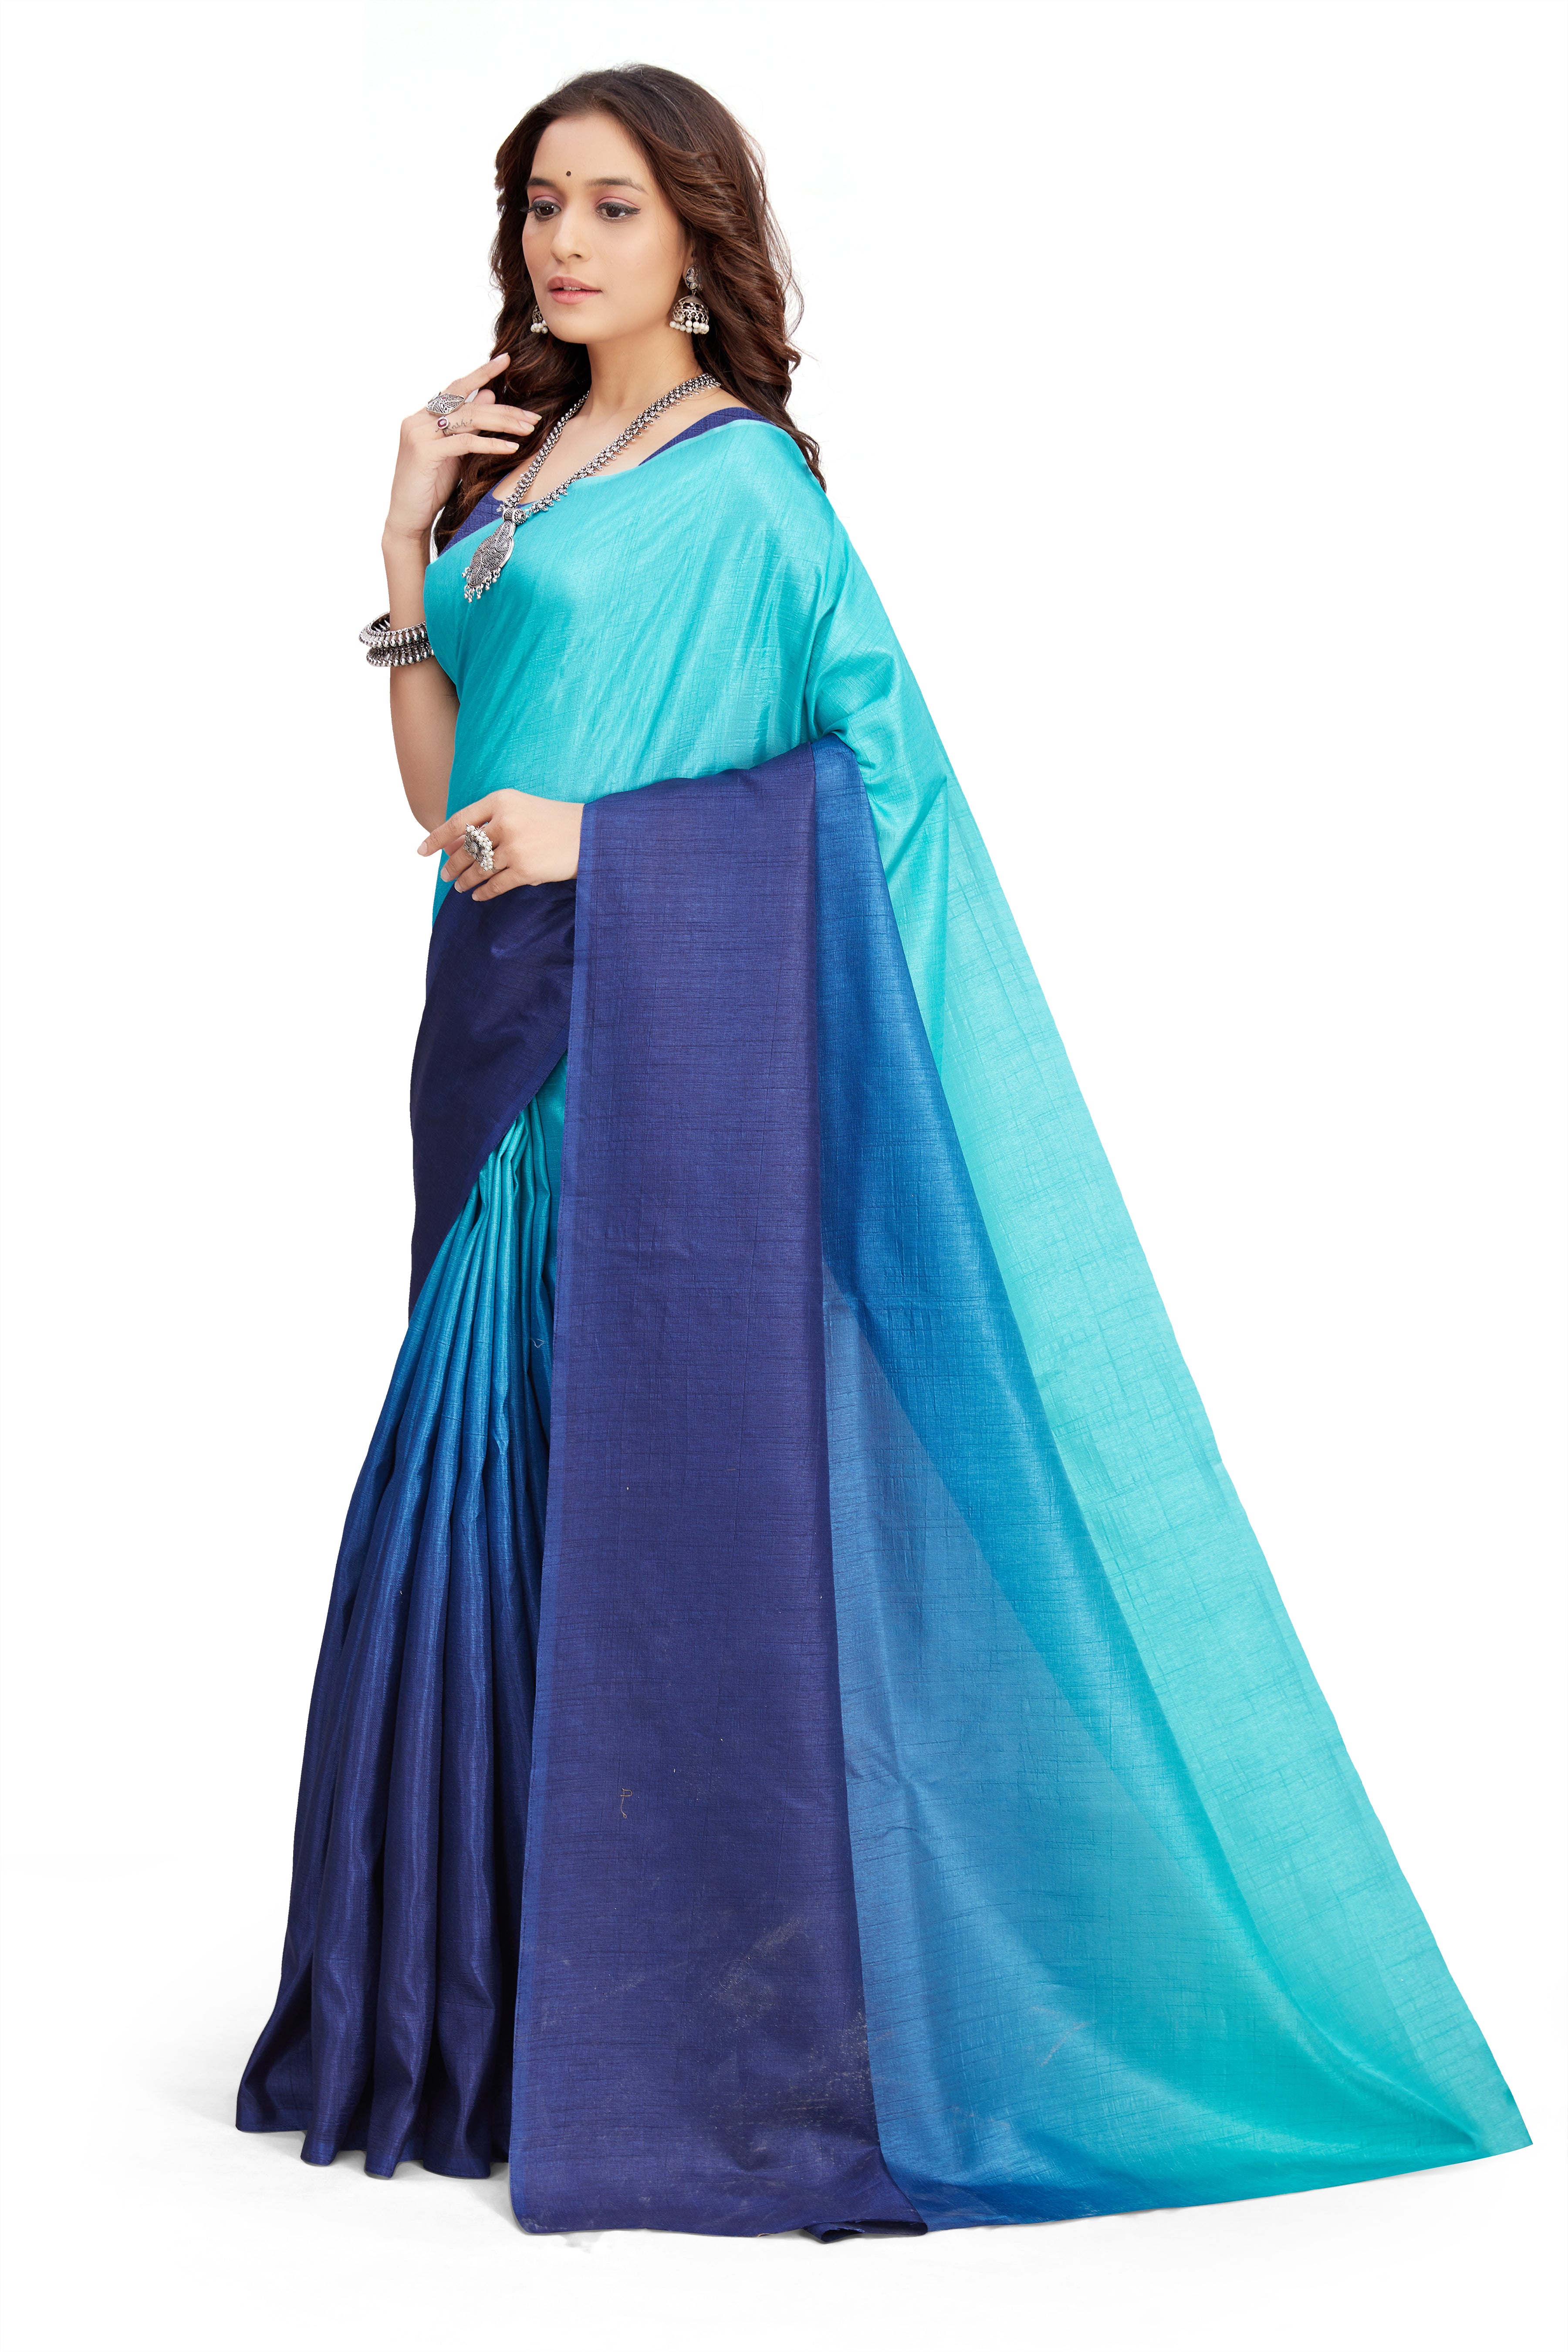 Women's self Woven Solid Textured Dual Shade Festive Wear Silk Blend Sari With Blouse Piece (Royal Blue) - NIMIDHYA